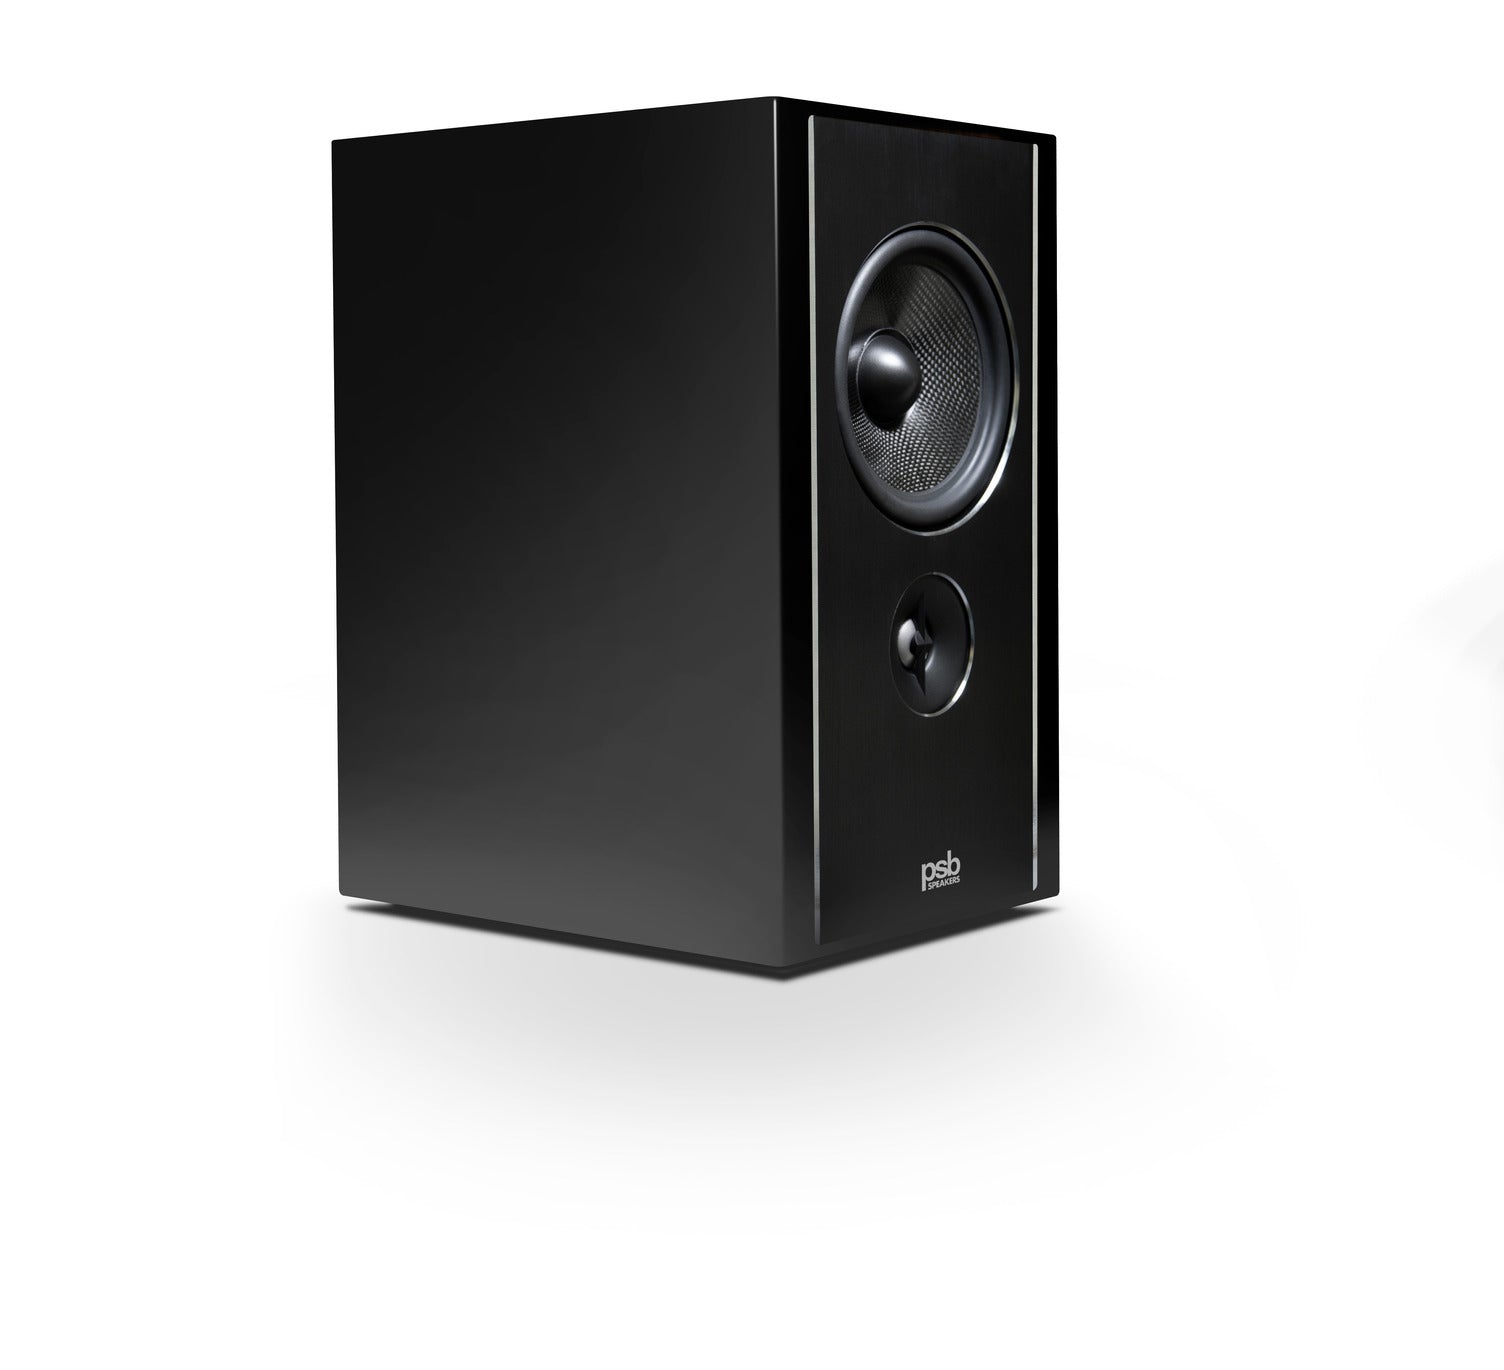 PSB Synchrony B600 Speakers - PSB Imagine X1T Tower Speaker - PSB Speakers is a Canada's leading manufacturer of top-performing and for high quality Audio Speakers, headphones, loudspeakers, subwoofers, Home Theater Systems, Floorstanding Speakers, Bookshelf Speakers, loudspeakers available at Vinyl Sound.